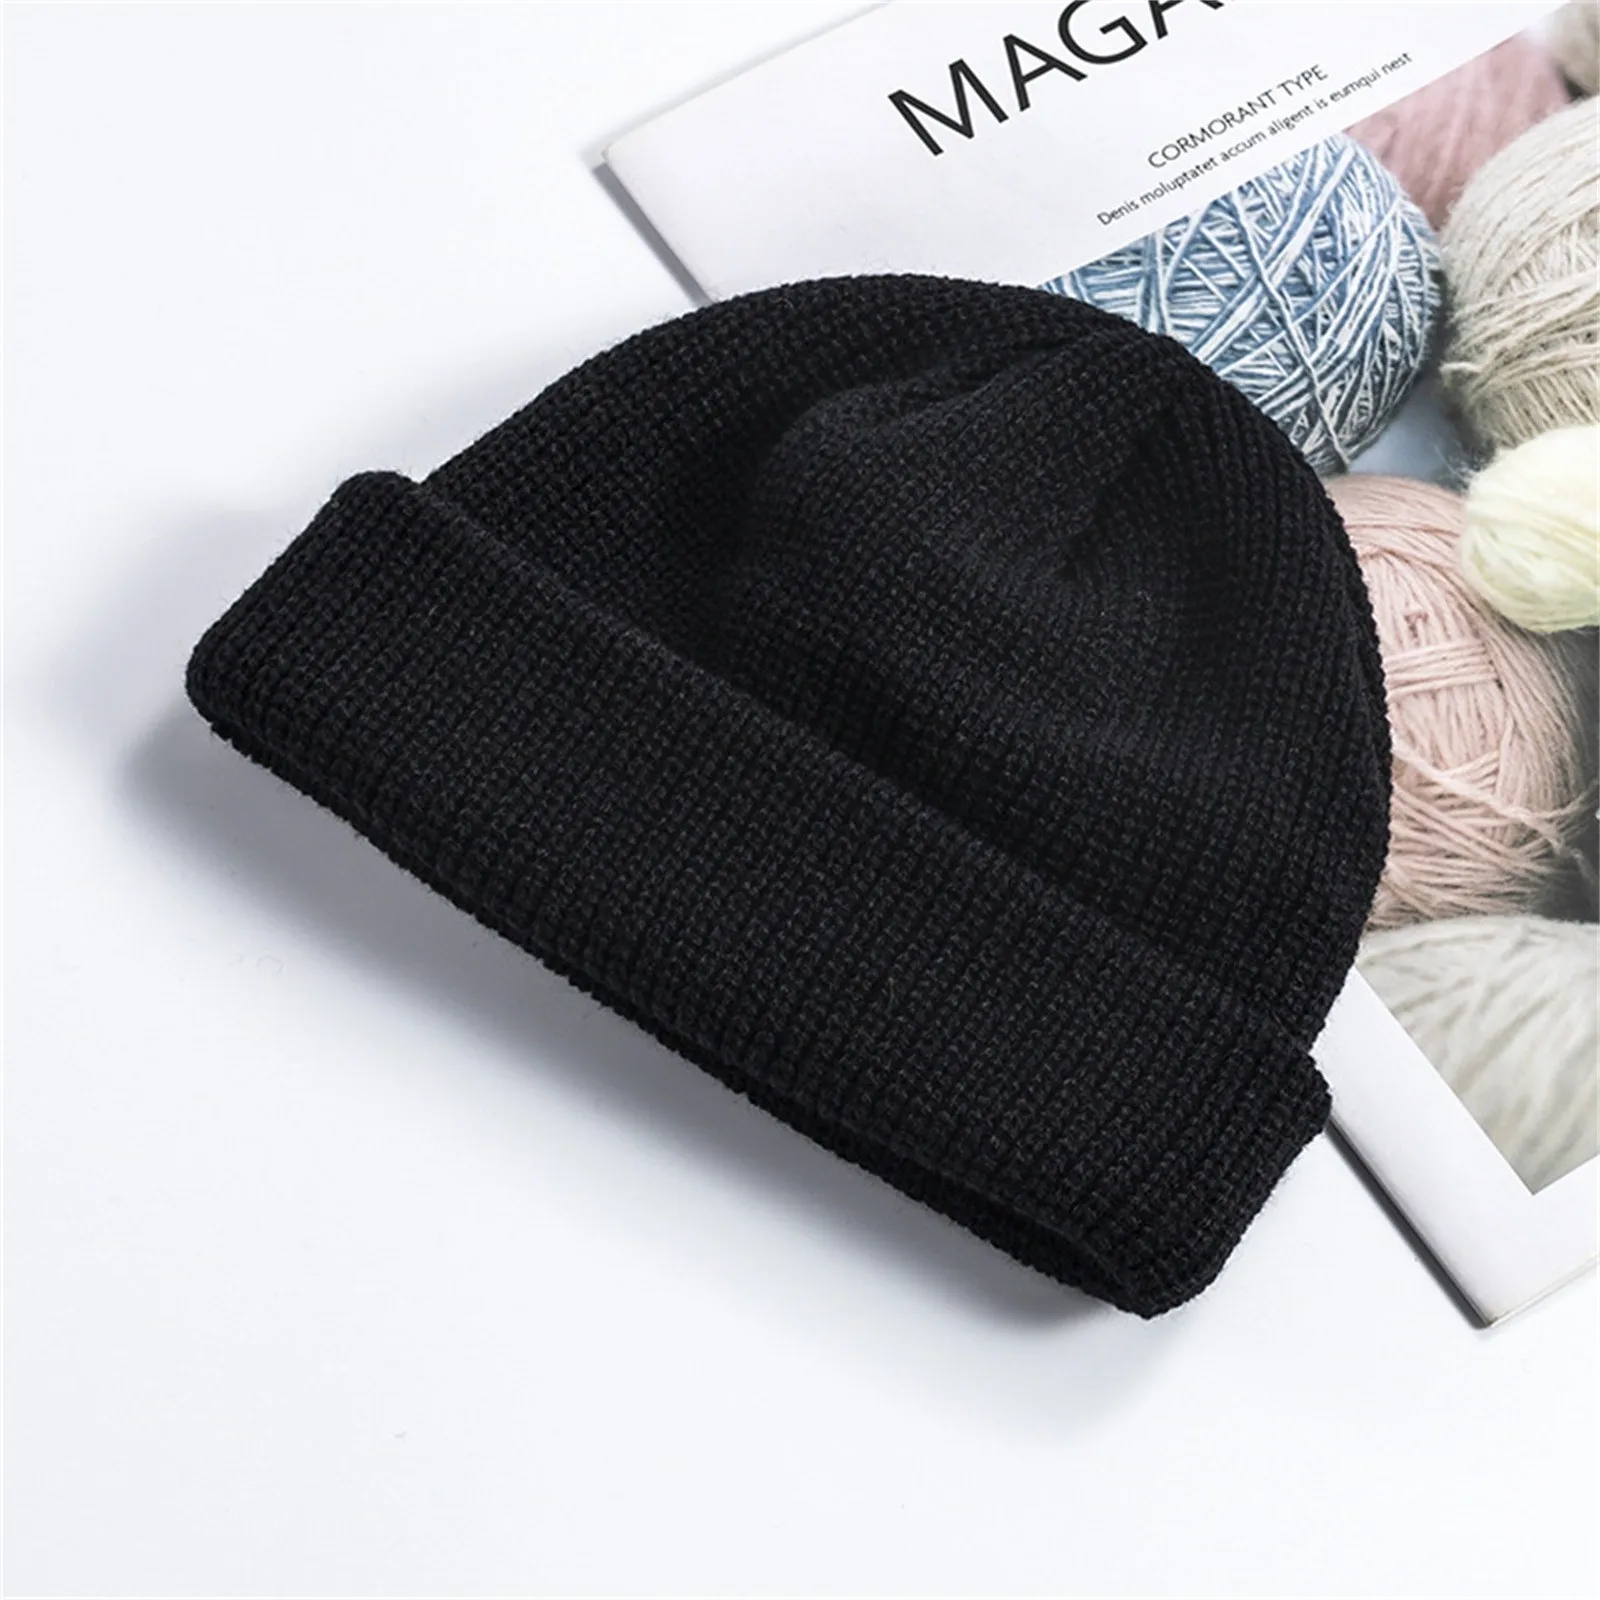 plain black cap Hats For Women and Men Solid Color Cute Chunky Caps Knitted Super Soft Stretchable Street Hip Hop Hats for Ladies Baseball cap custom ball caps